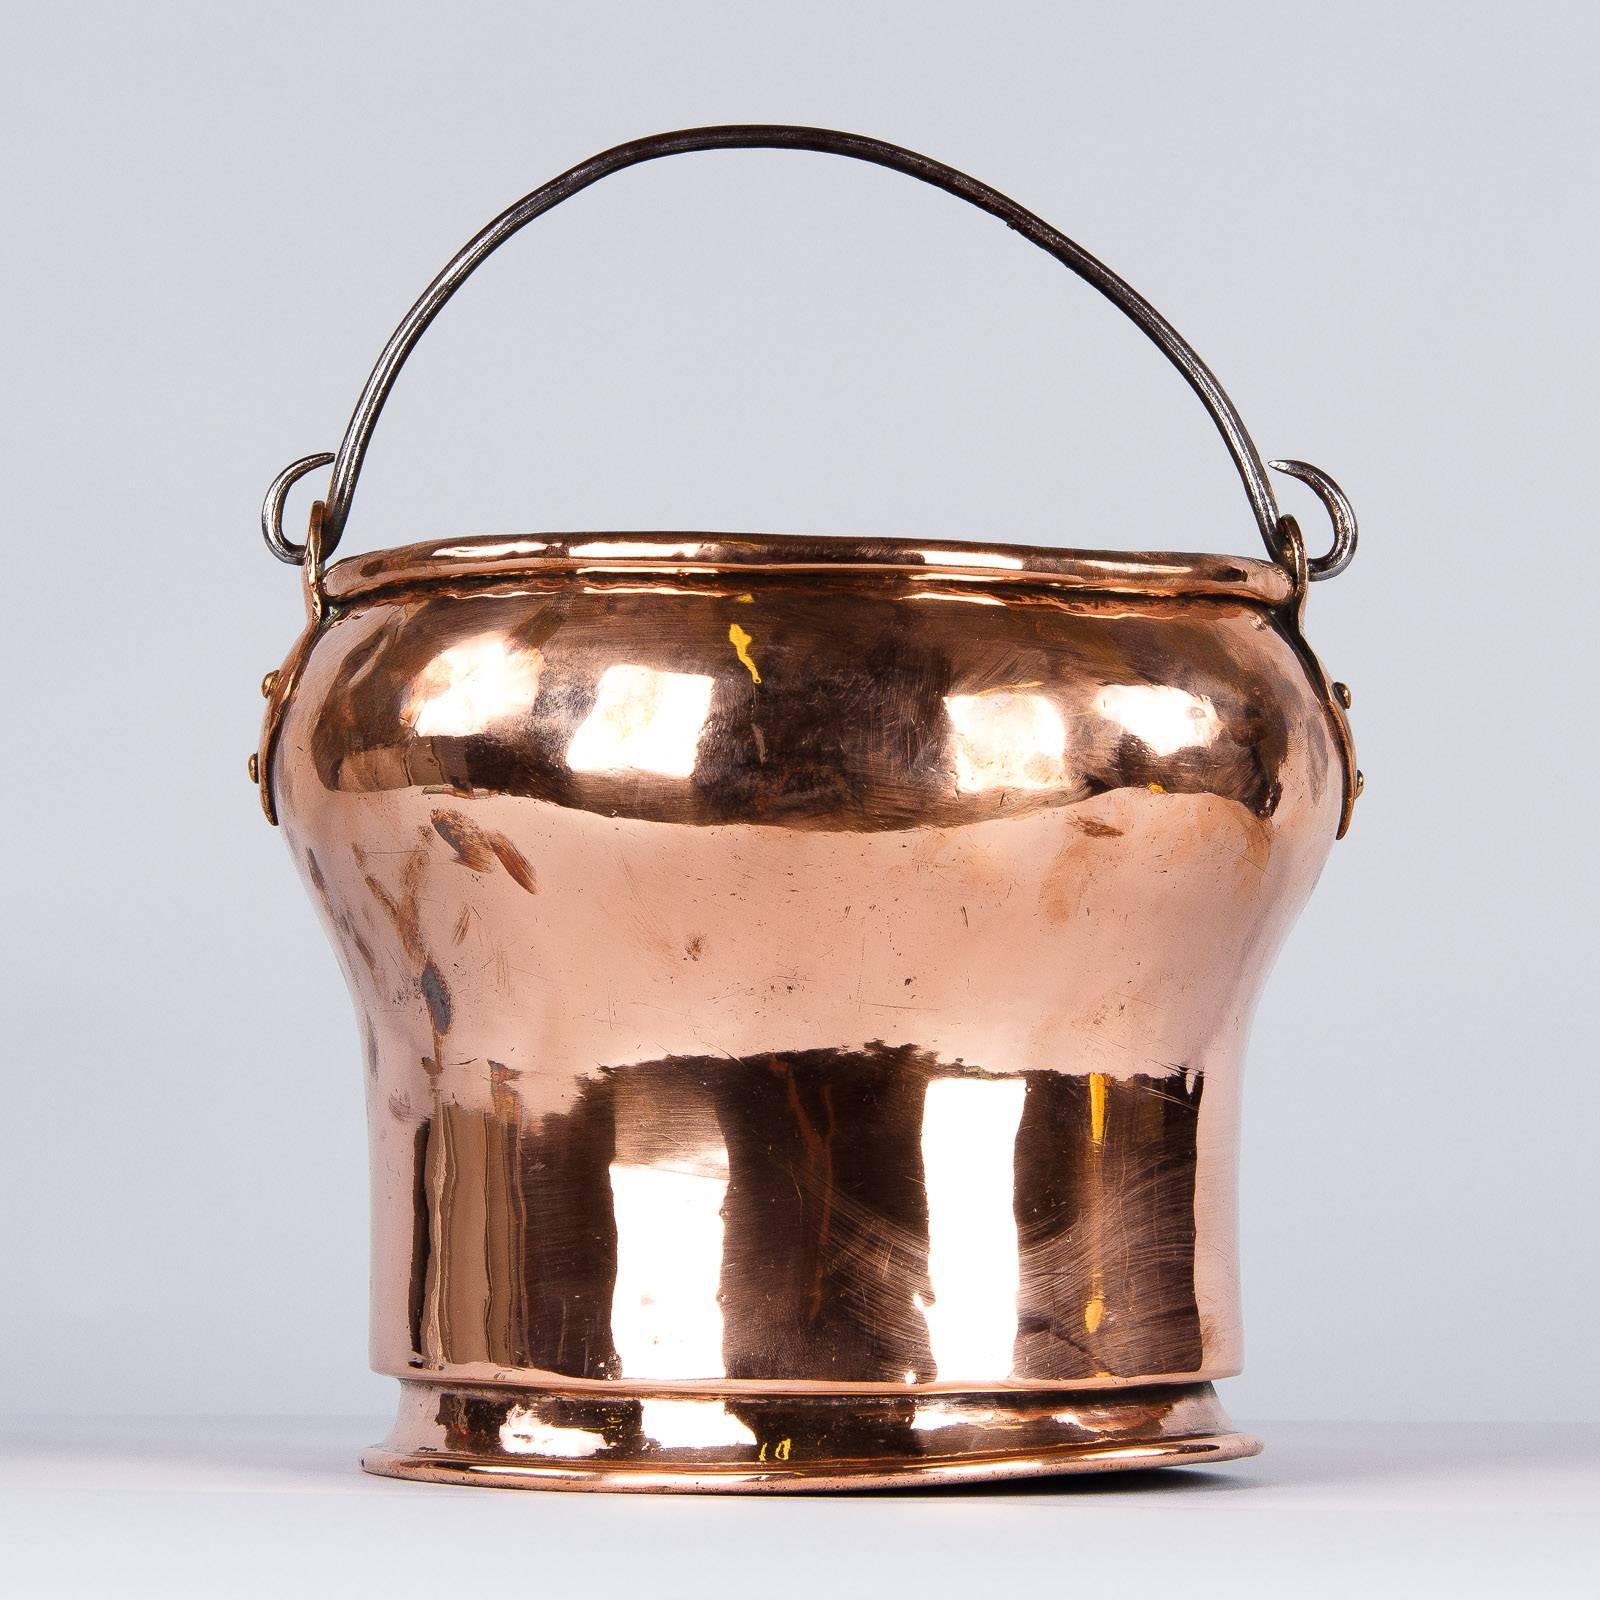 French Provincial French Copper Bucket, Late 19th Century